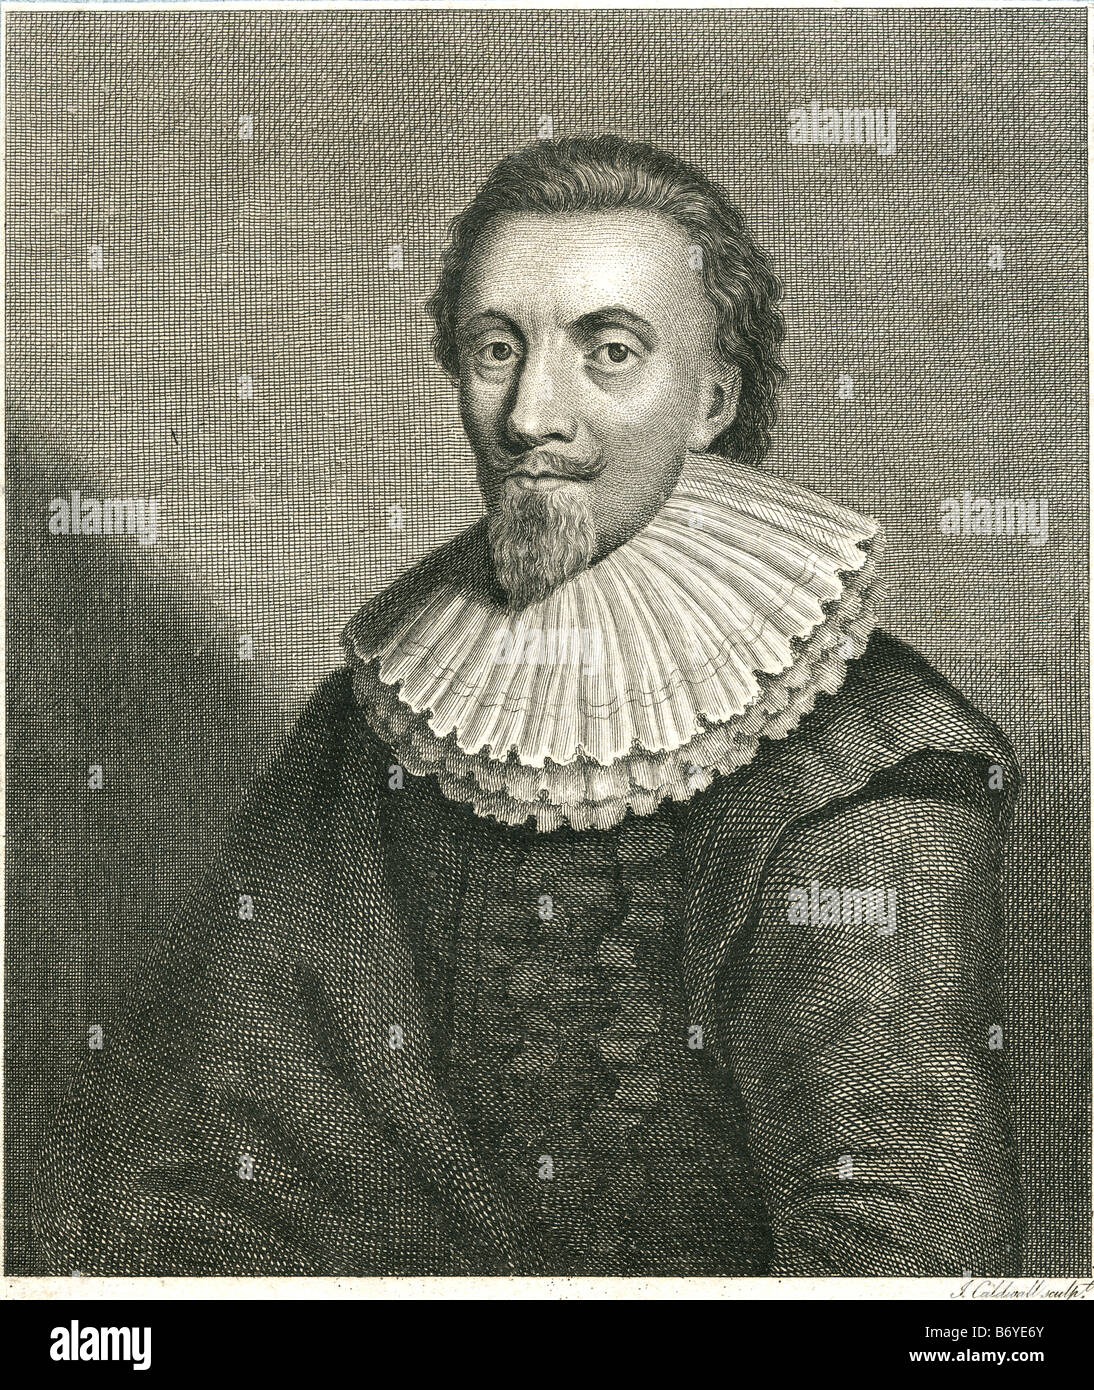 George Calvert, 1st Baron Baltimore (1579 – 15 April 1632) was an English politician and coloniser. He achieved domestic Stock Photo